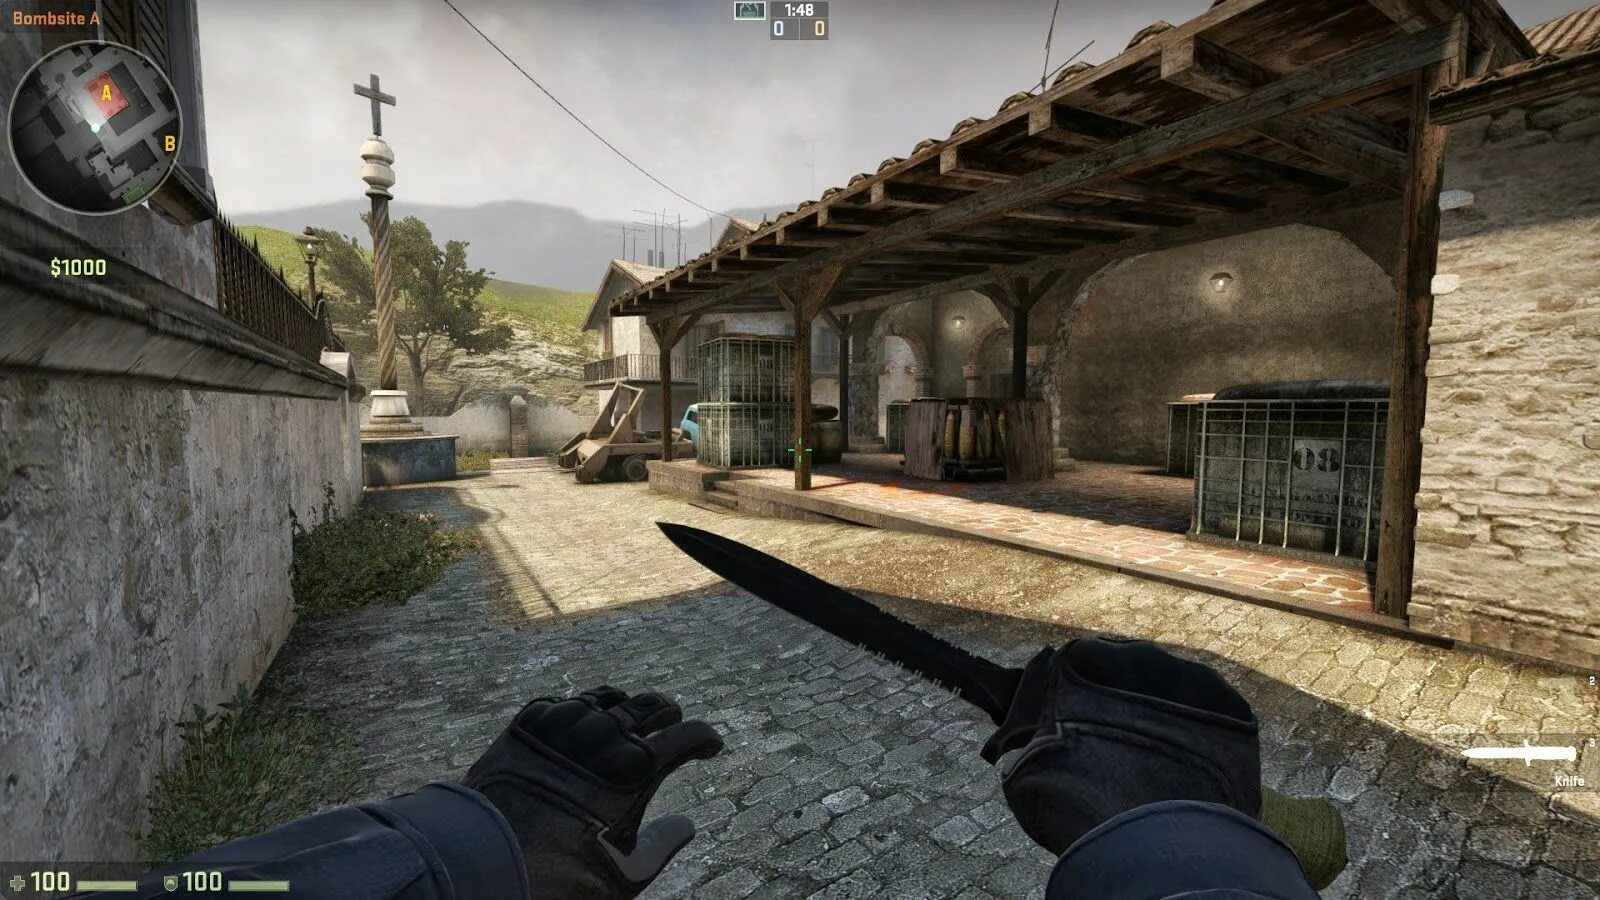 Counter-Strike: Global Offensive. Counter страйк Global Offensive. Counter-Strike: Global Offensive 2012. Counter-Strike: Global Offensive 1.6.